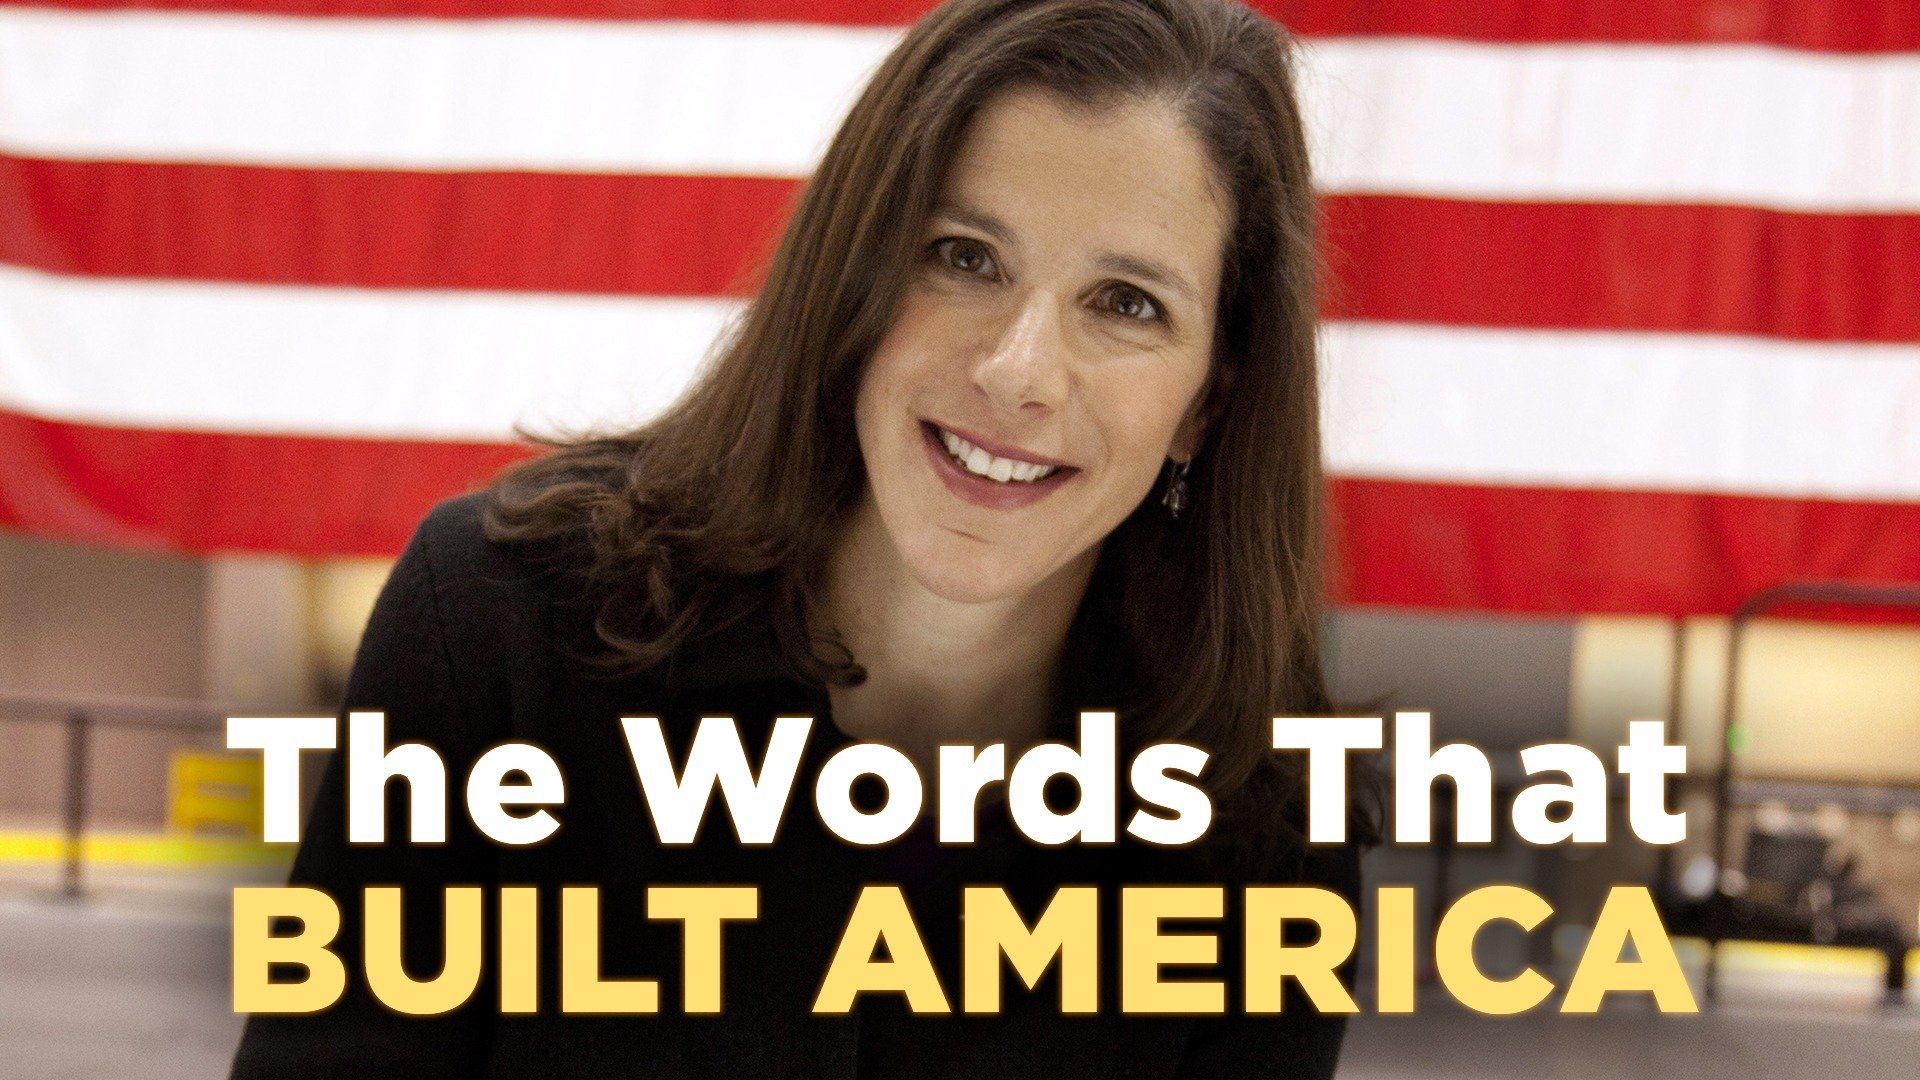 The Words That Built America Backdrop